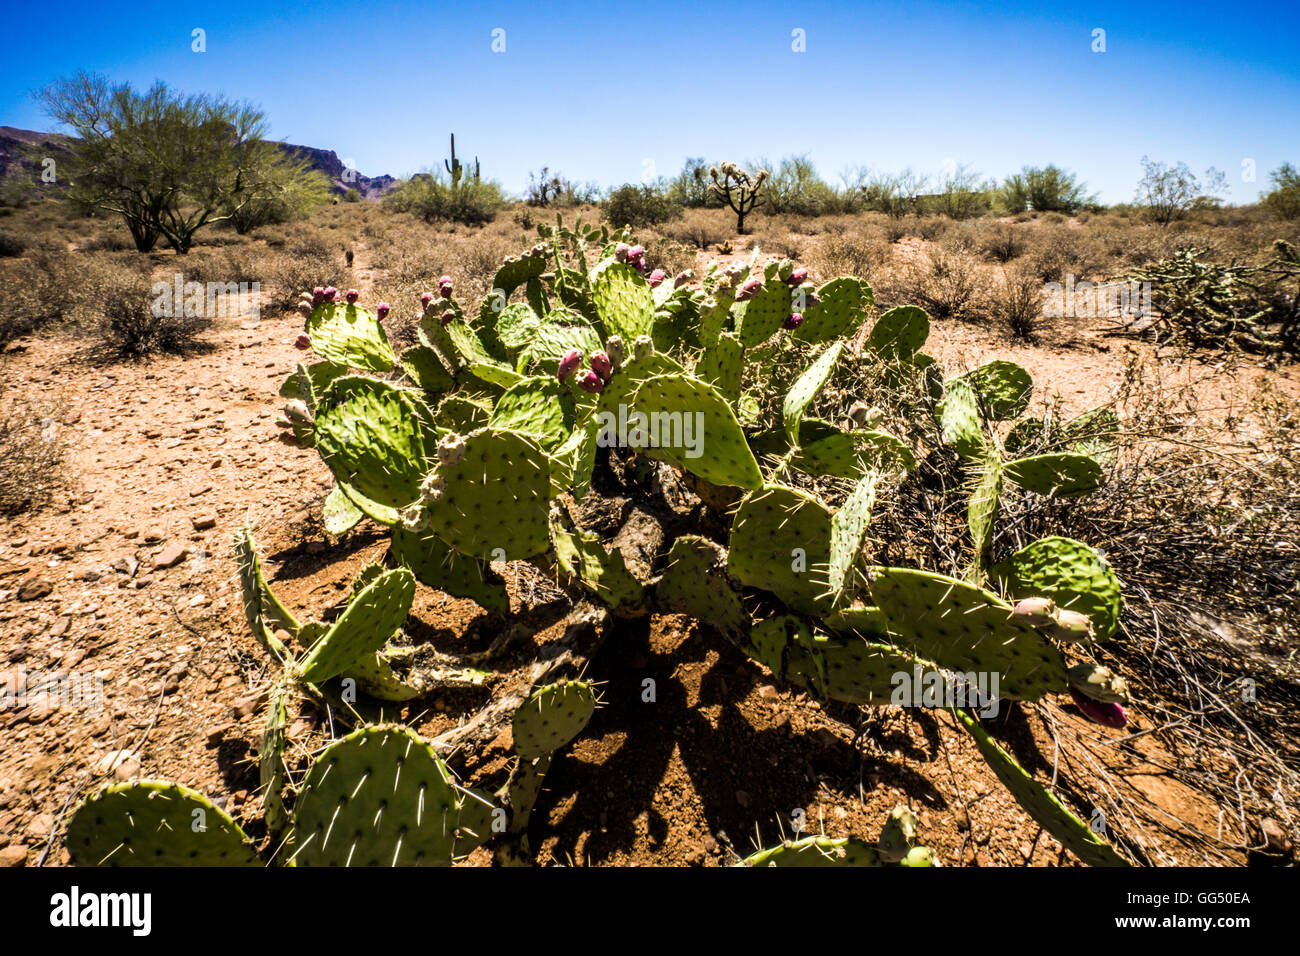 Prickly Pear Cactus in Tonto National Forest in the Arizona desert, USA Stock Photo